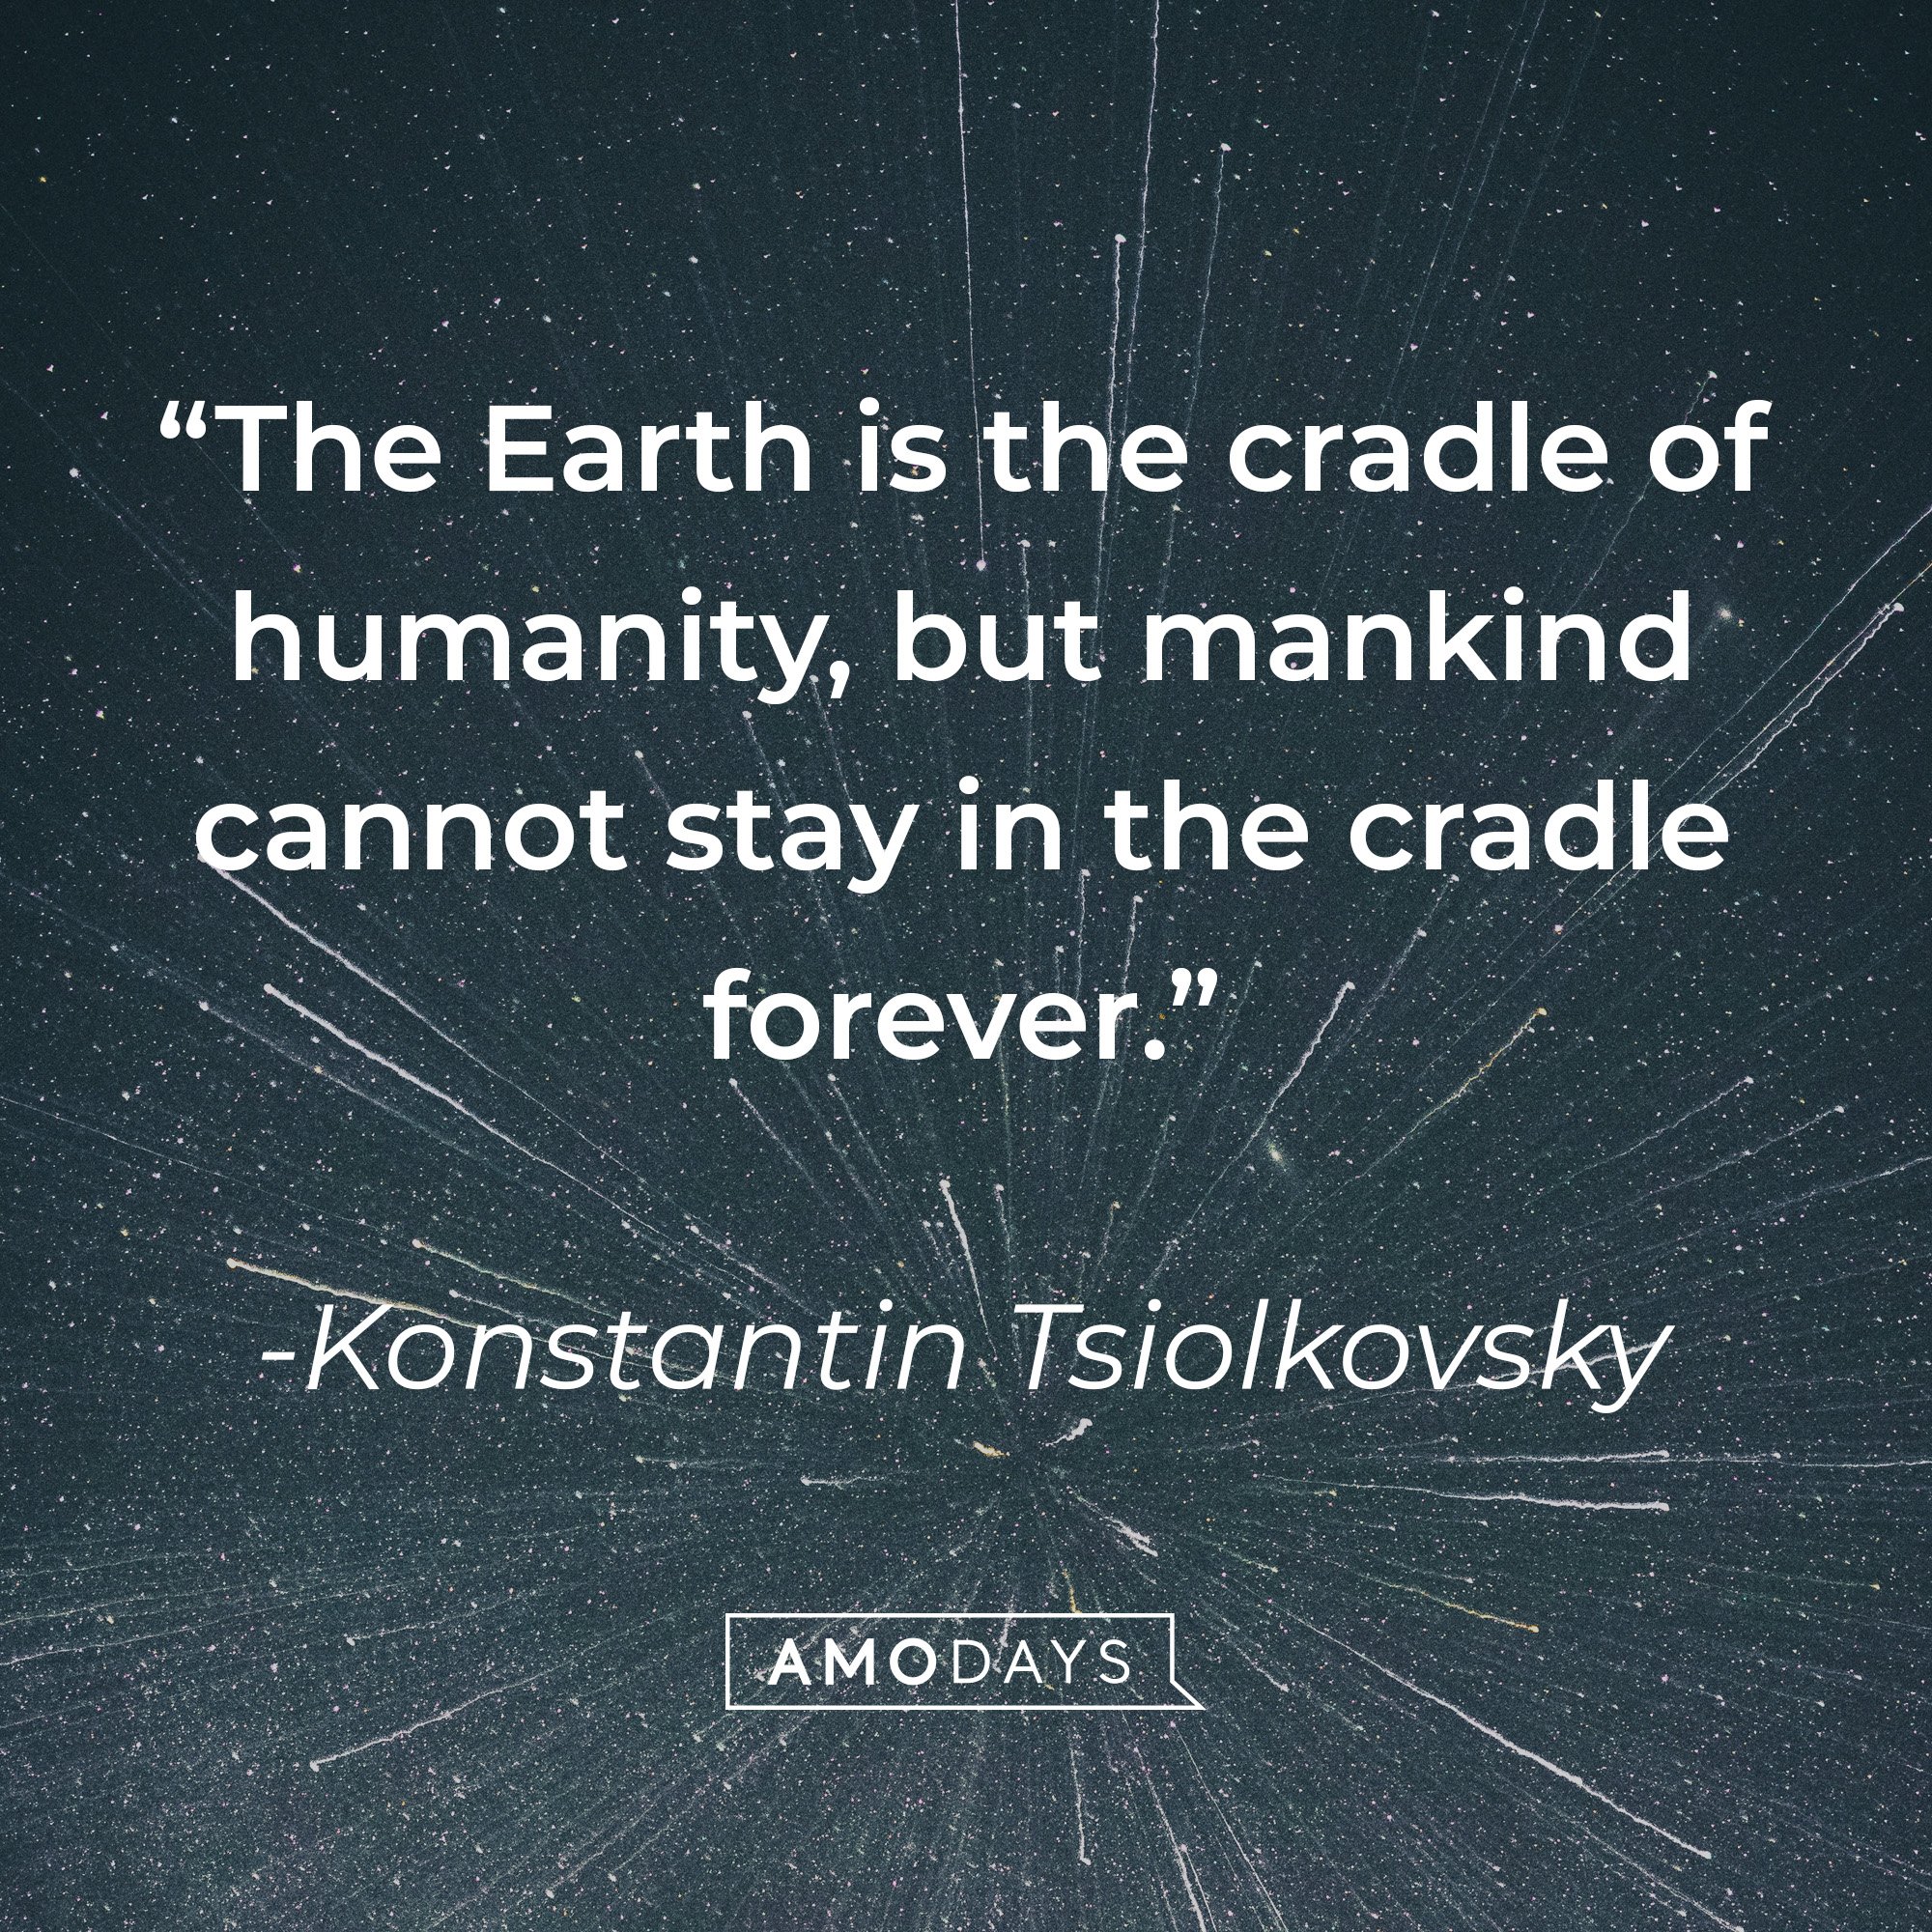 Konstantin Tsiolkovsky’s quote: “The Earth is the cradle of humanity, but mankind cannot stay in the cradle forever.” | Image: AmoDays 